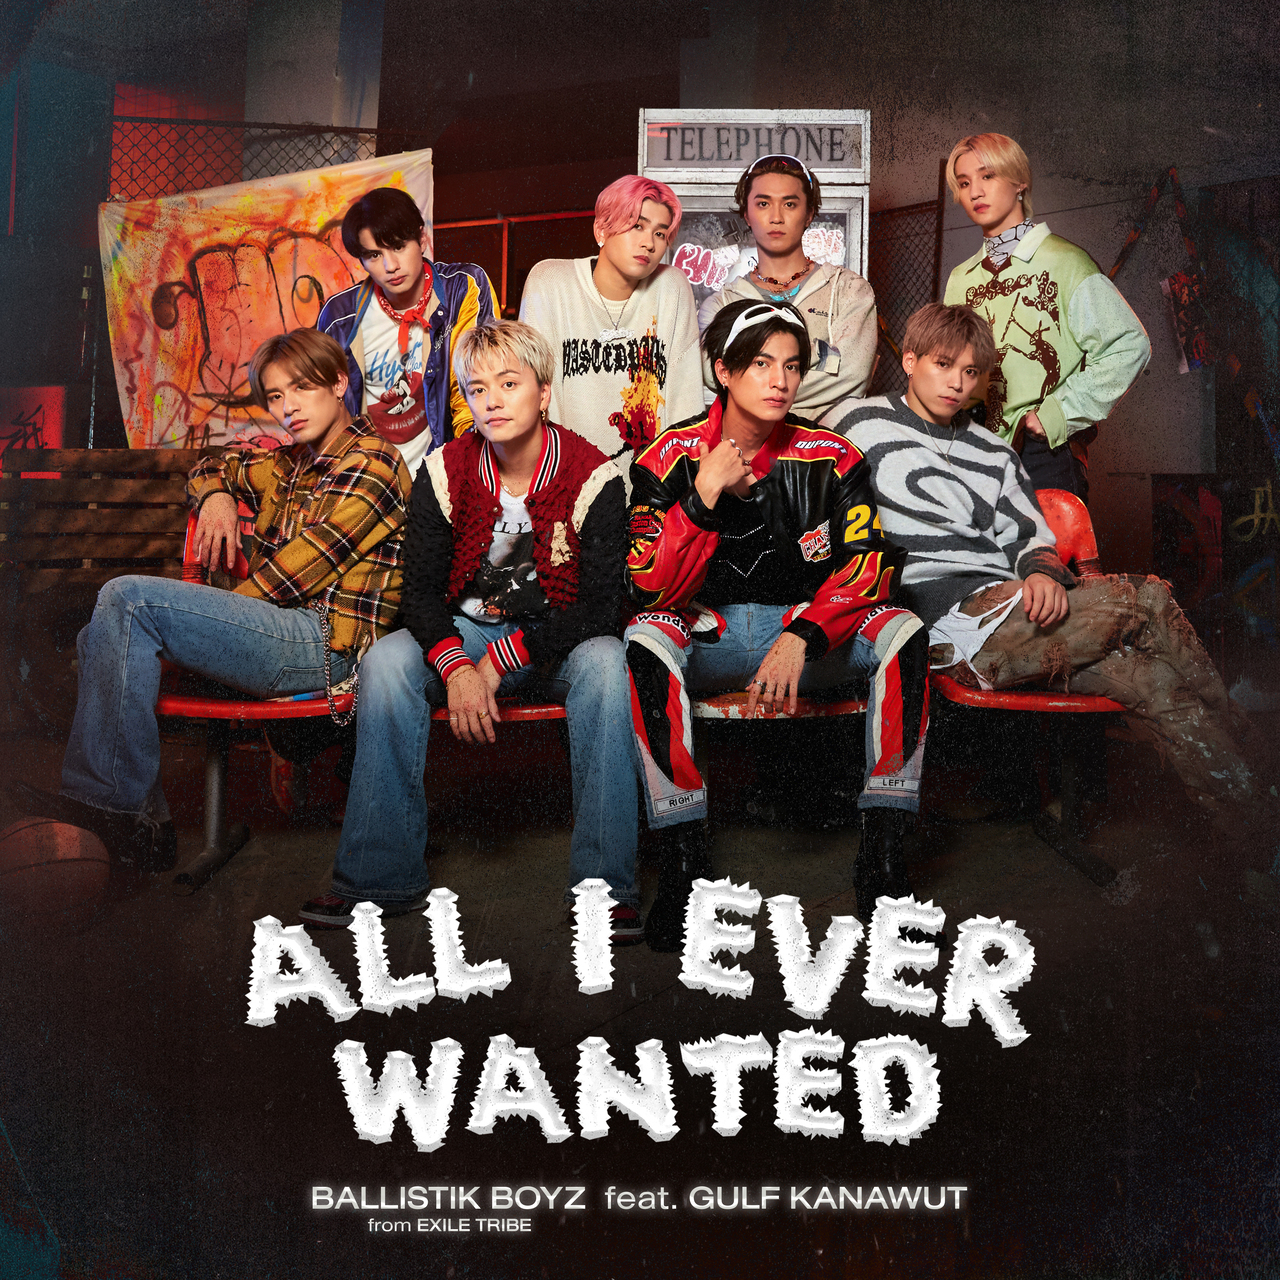 BALLISTIK BOYZ from EXILE TRIBE ft. featuring Gulf Kanawut All I Ever Wanted cover artwork